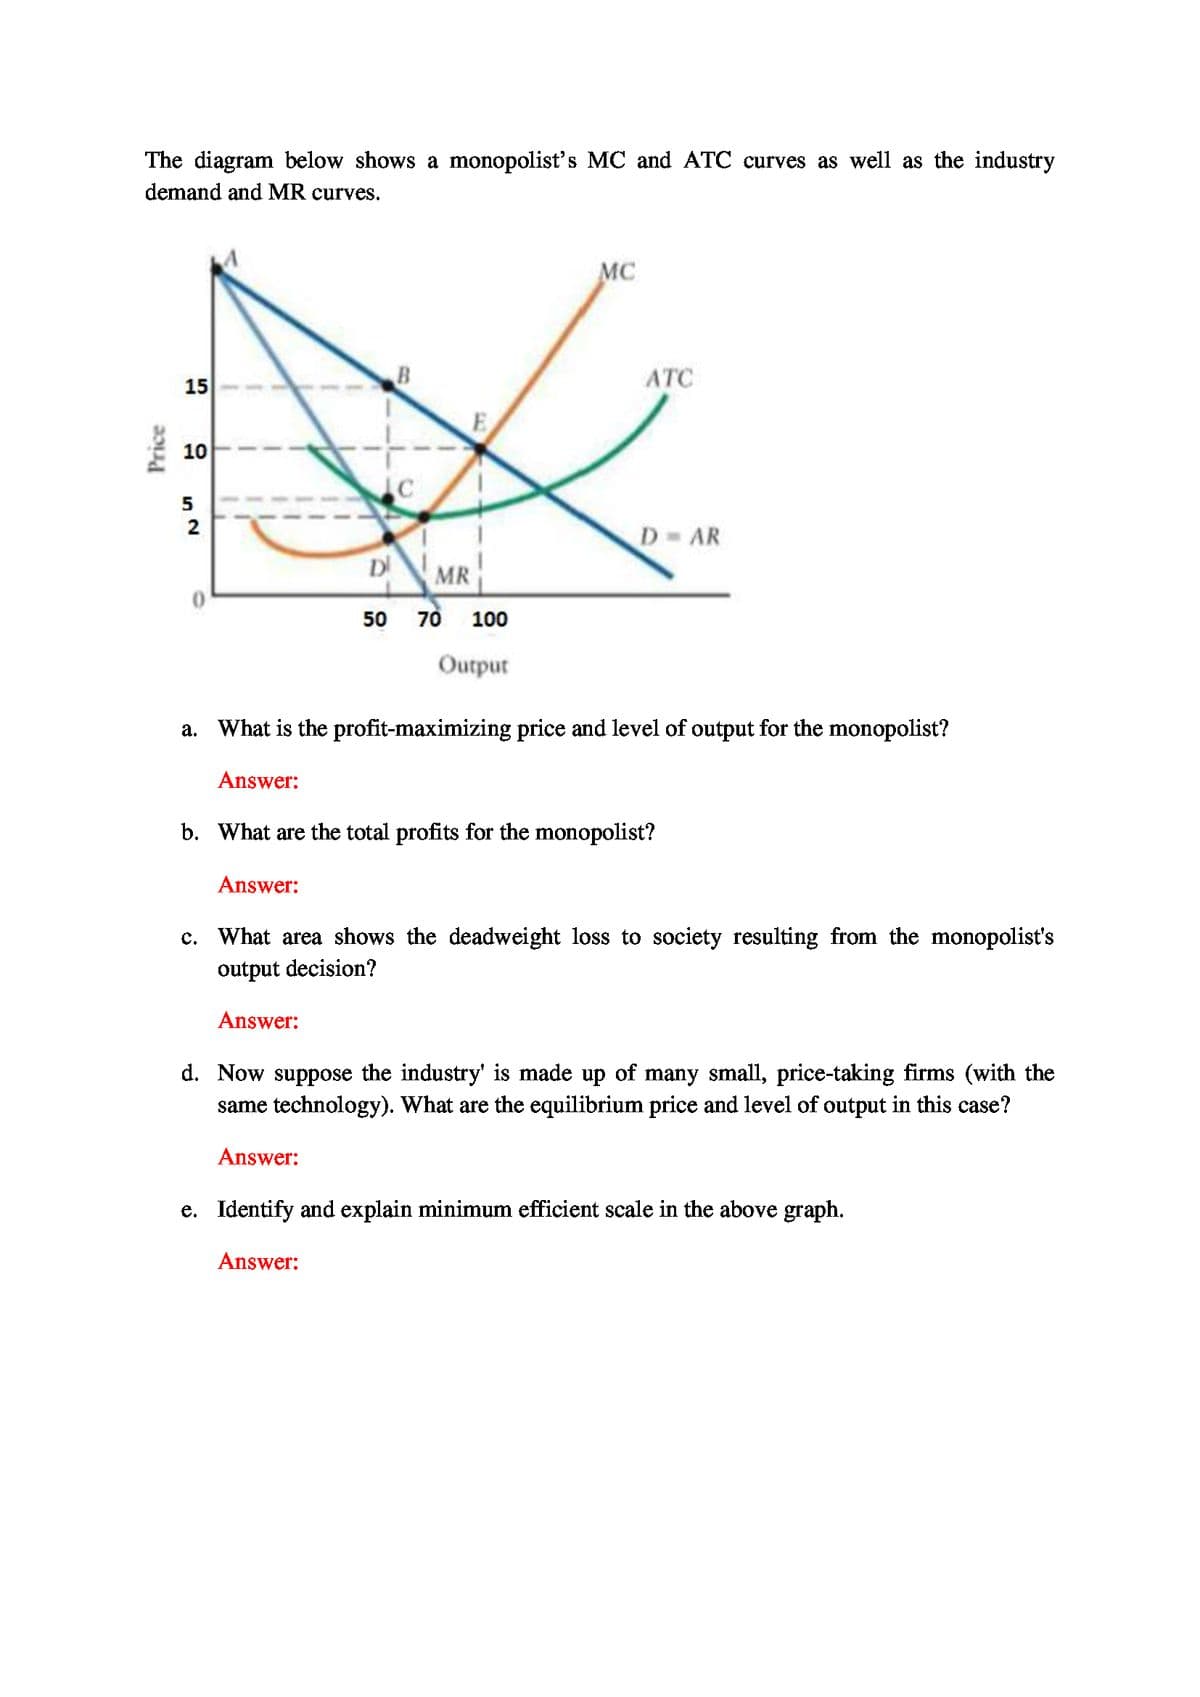 The diagram below shows a monopolist's MC and ATC curves as well as the industry
demand and MR curves.
MC
ATC
15
E
10
5
2
D AR
D
MR
50 70
100
Output
a. What is the profit-maximizing price and level of output for the monopolist?
Answer:
b. What are the total profits for the monopolist?
Answer:
c. What area shows the deadweight loss to society resulting from the monopolist's
output decision?
Answer:
d. Now suppose the industry' is made up of many small, price-taking firms (with the
same technology). What are the equilibrium price and level of output in this case?
Answer:
e. Identify and explain minimum efficient scale in the above graph.
Answer:
Price
